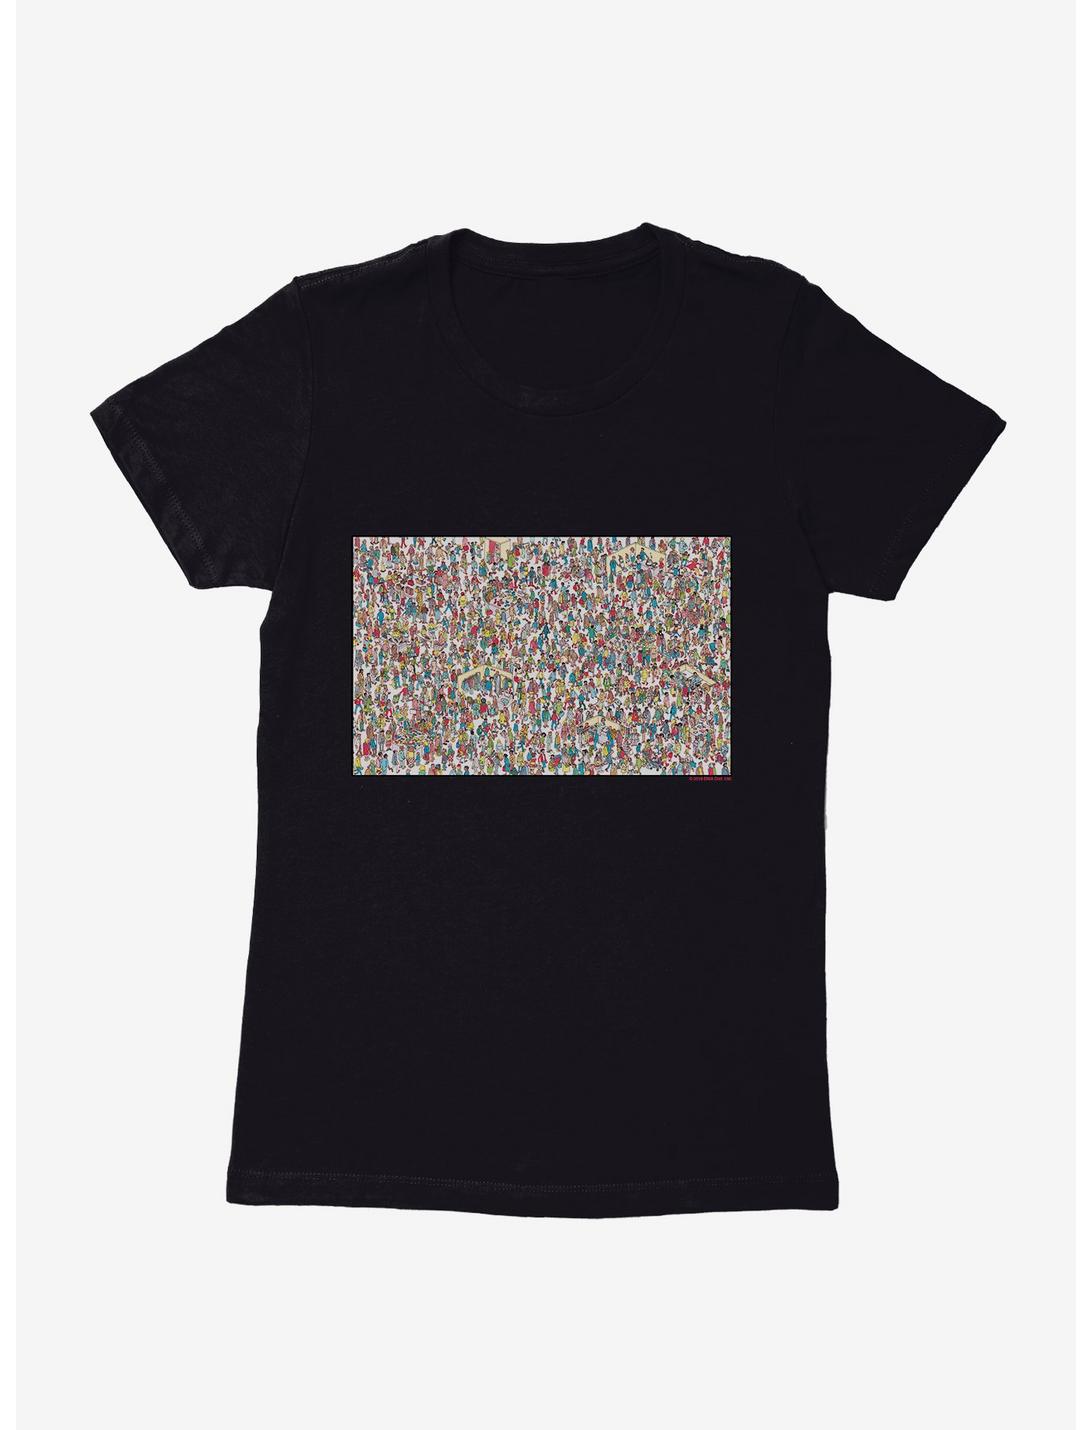 Where's Waldo? Search The Department Store Womens T-Shirt, BLACK, hi-res